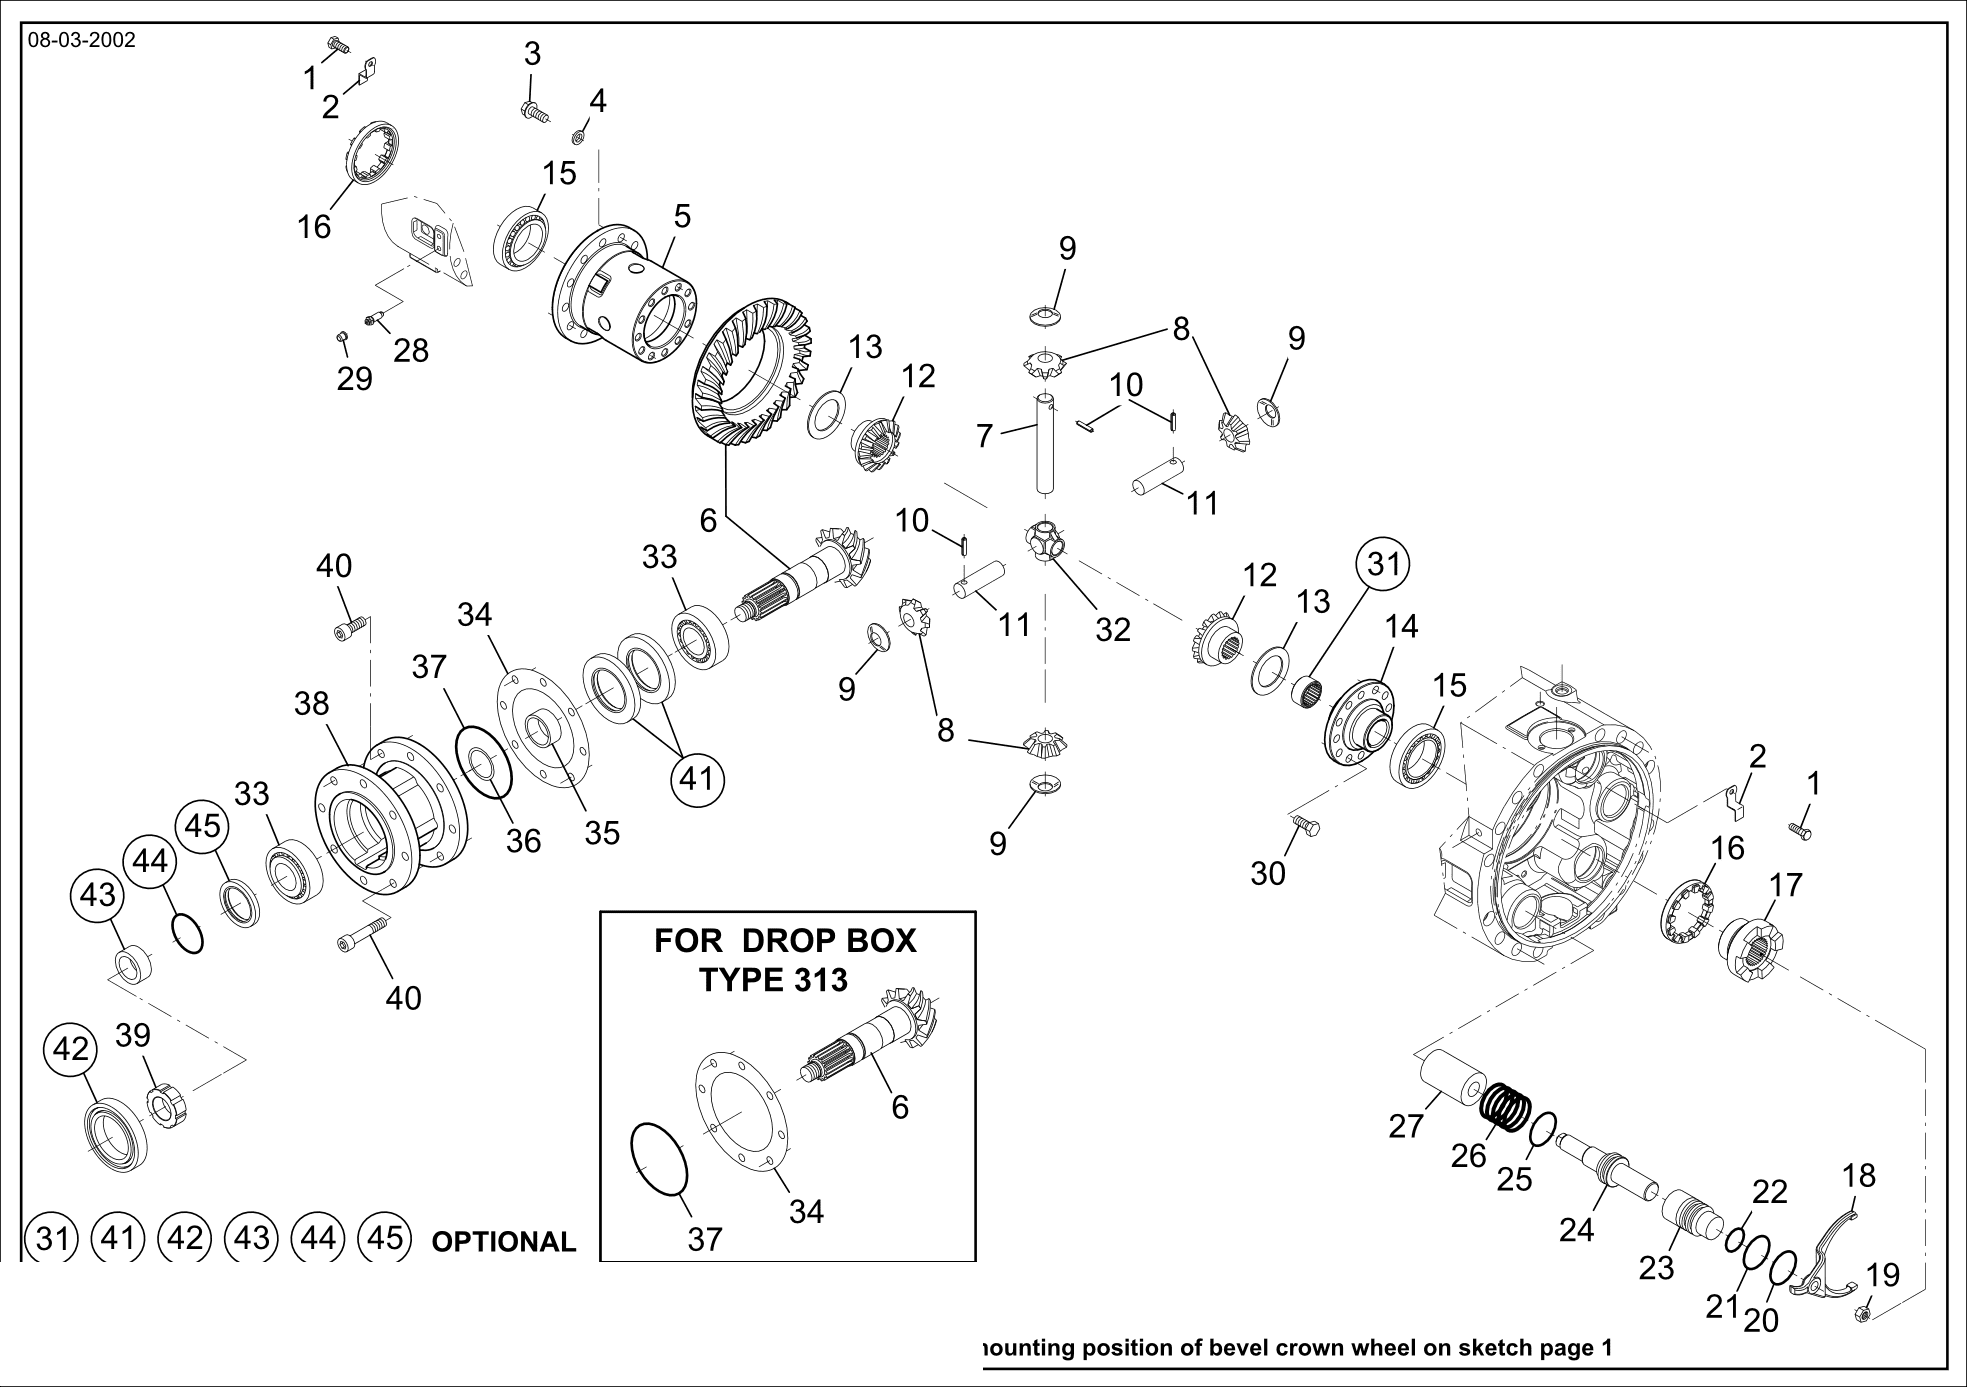 drawing for BUCYRUS 015424-2-33 - PISTON (figure 4)